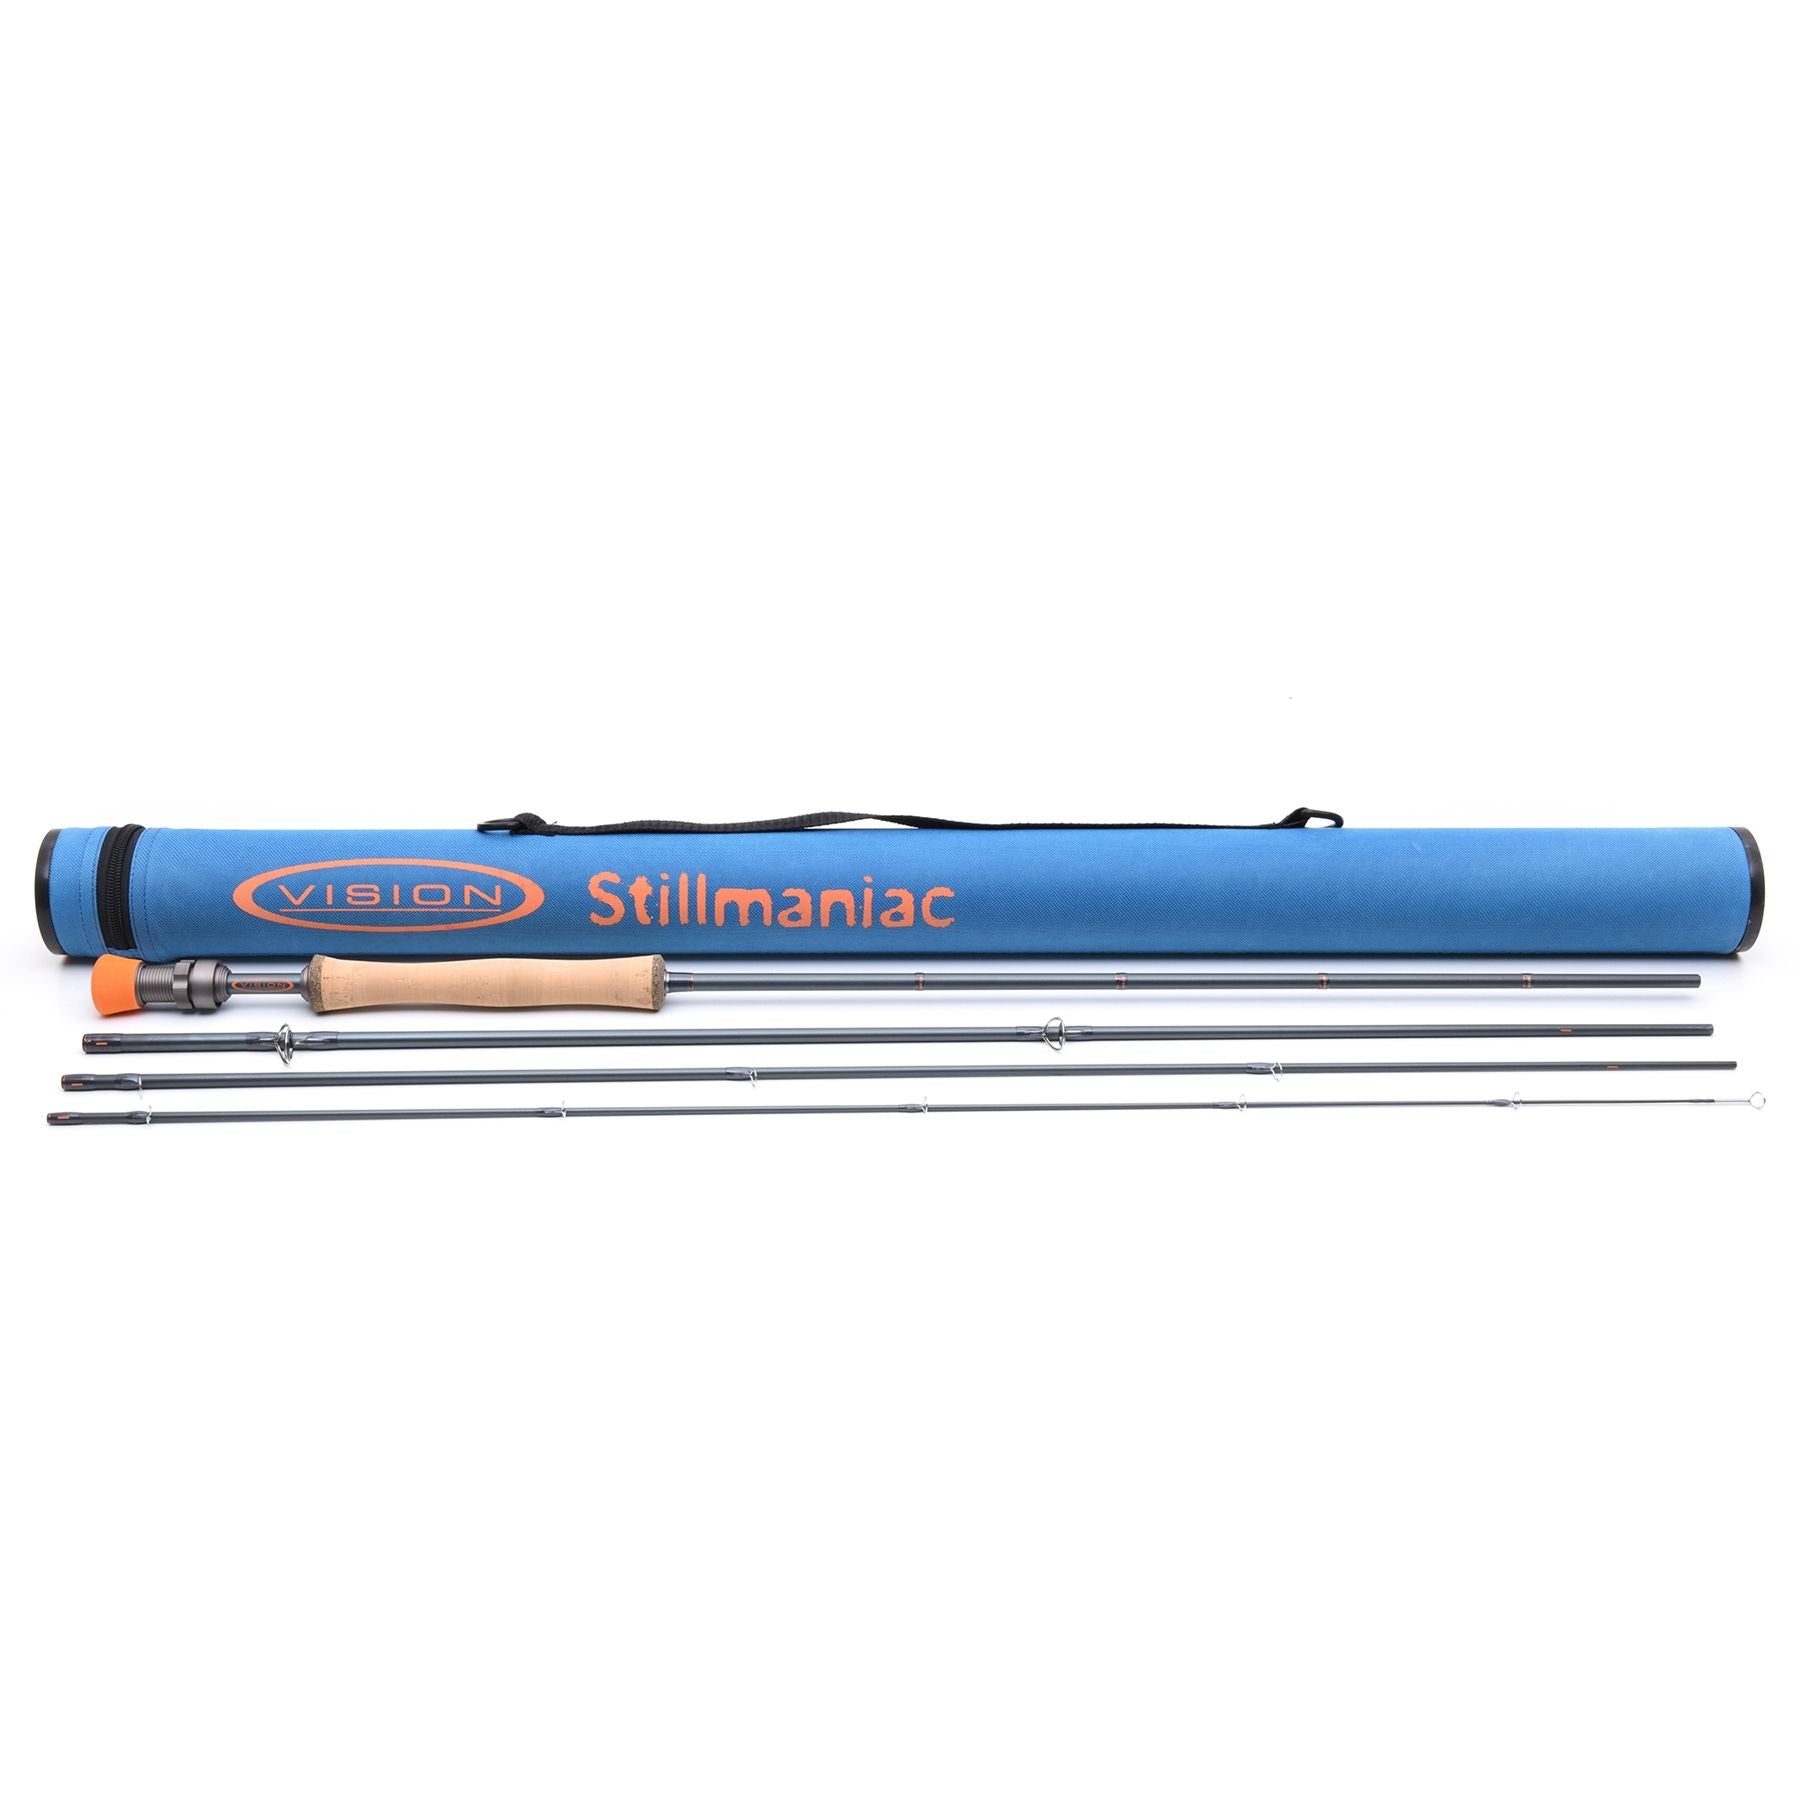 VISION STILLMANIAC FLY RODS - SAVE £100 OFF RRP! — Rod And Tackle